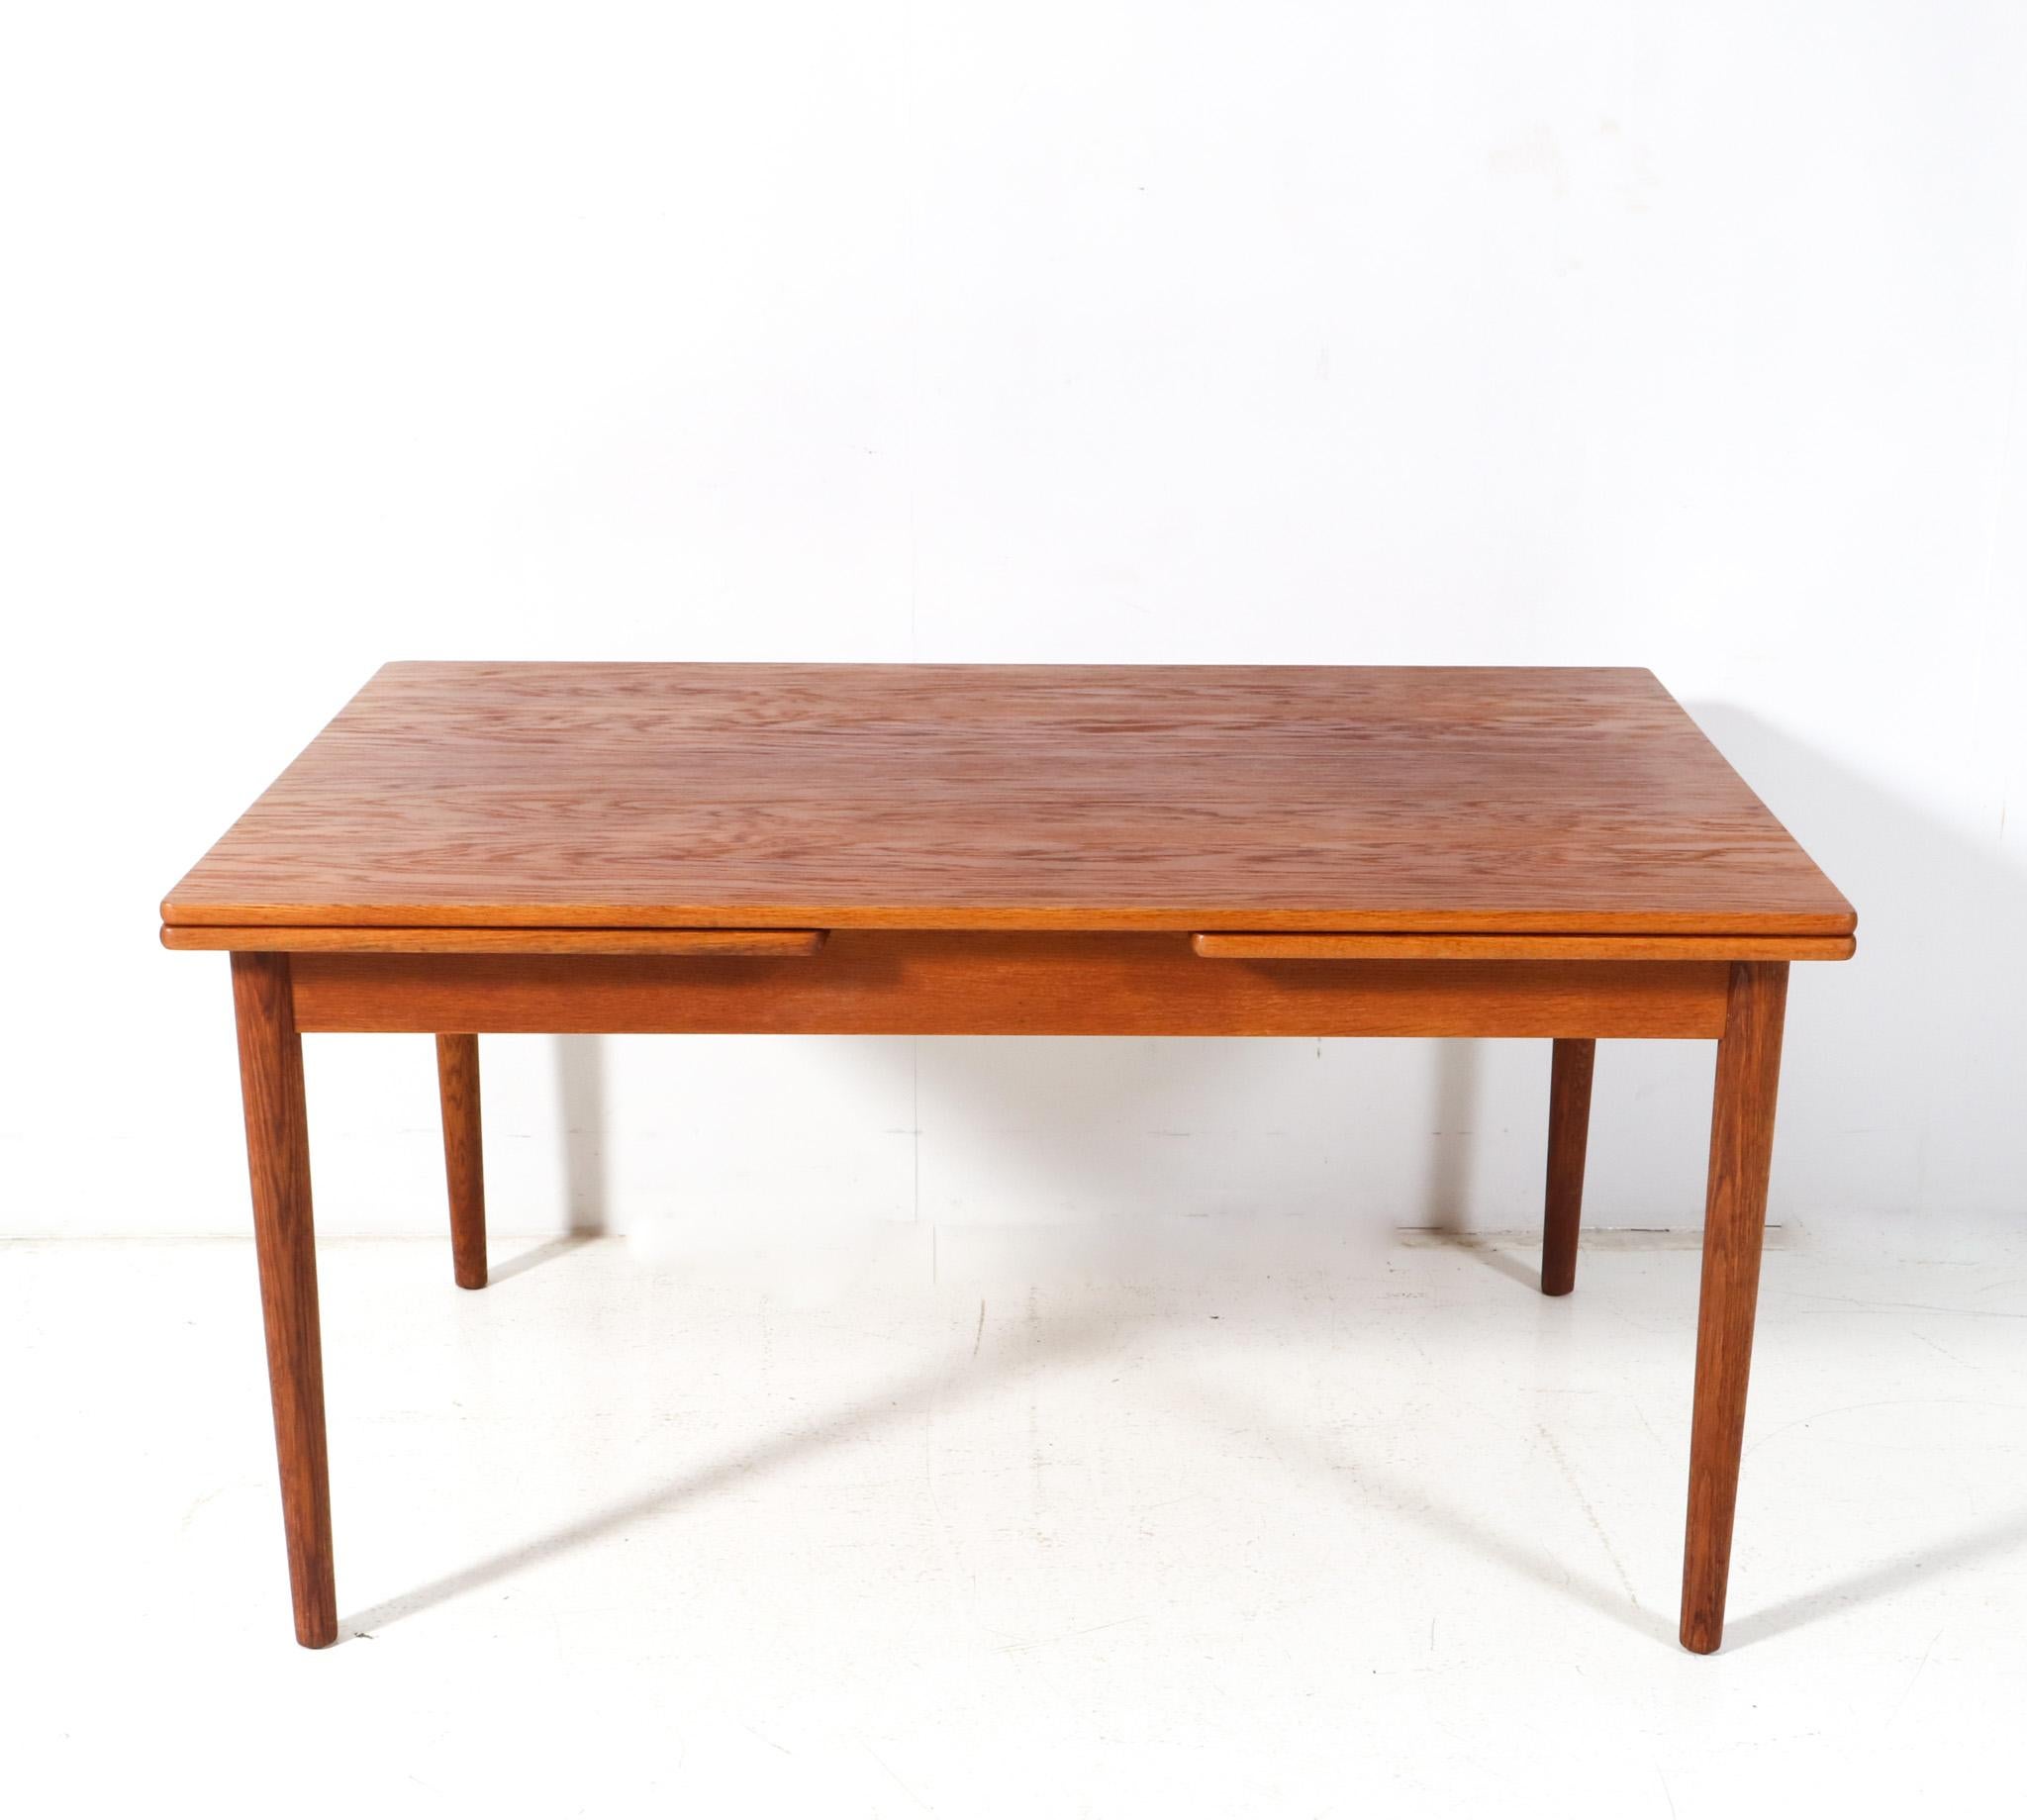 Stunning and rare Mid-Century Modern AT-316 dining room table.
Design by Hans J. Wegner for Andreas Tuck Møbelfabrik.
Striking Danish design from the 1960s.
Solid oak frame with four tapered legs and original oak veneered top and two extensions.
The